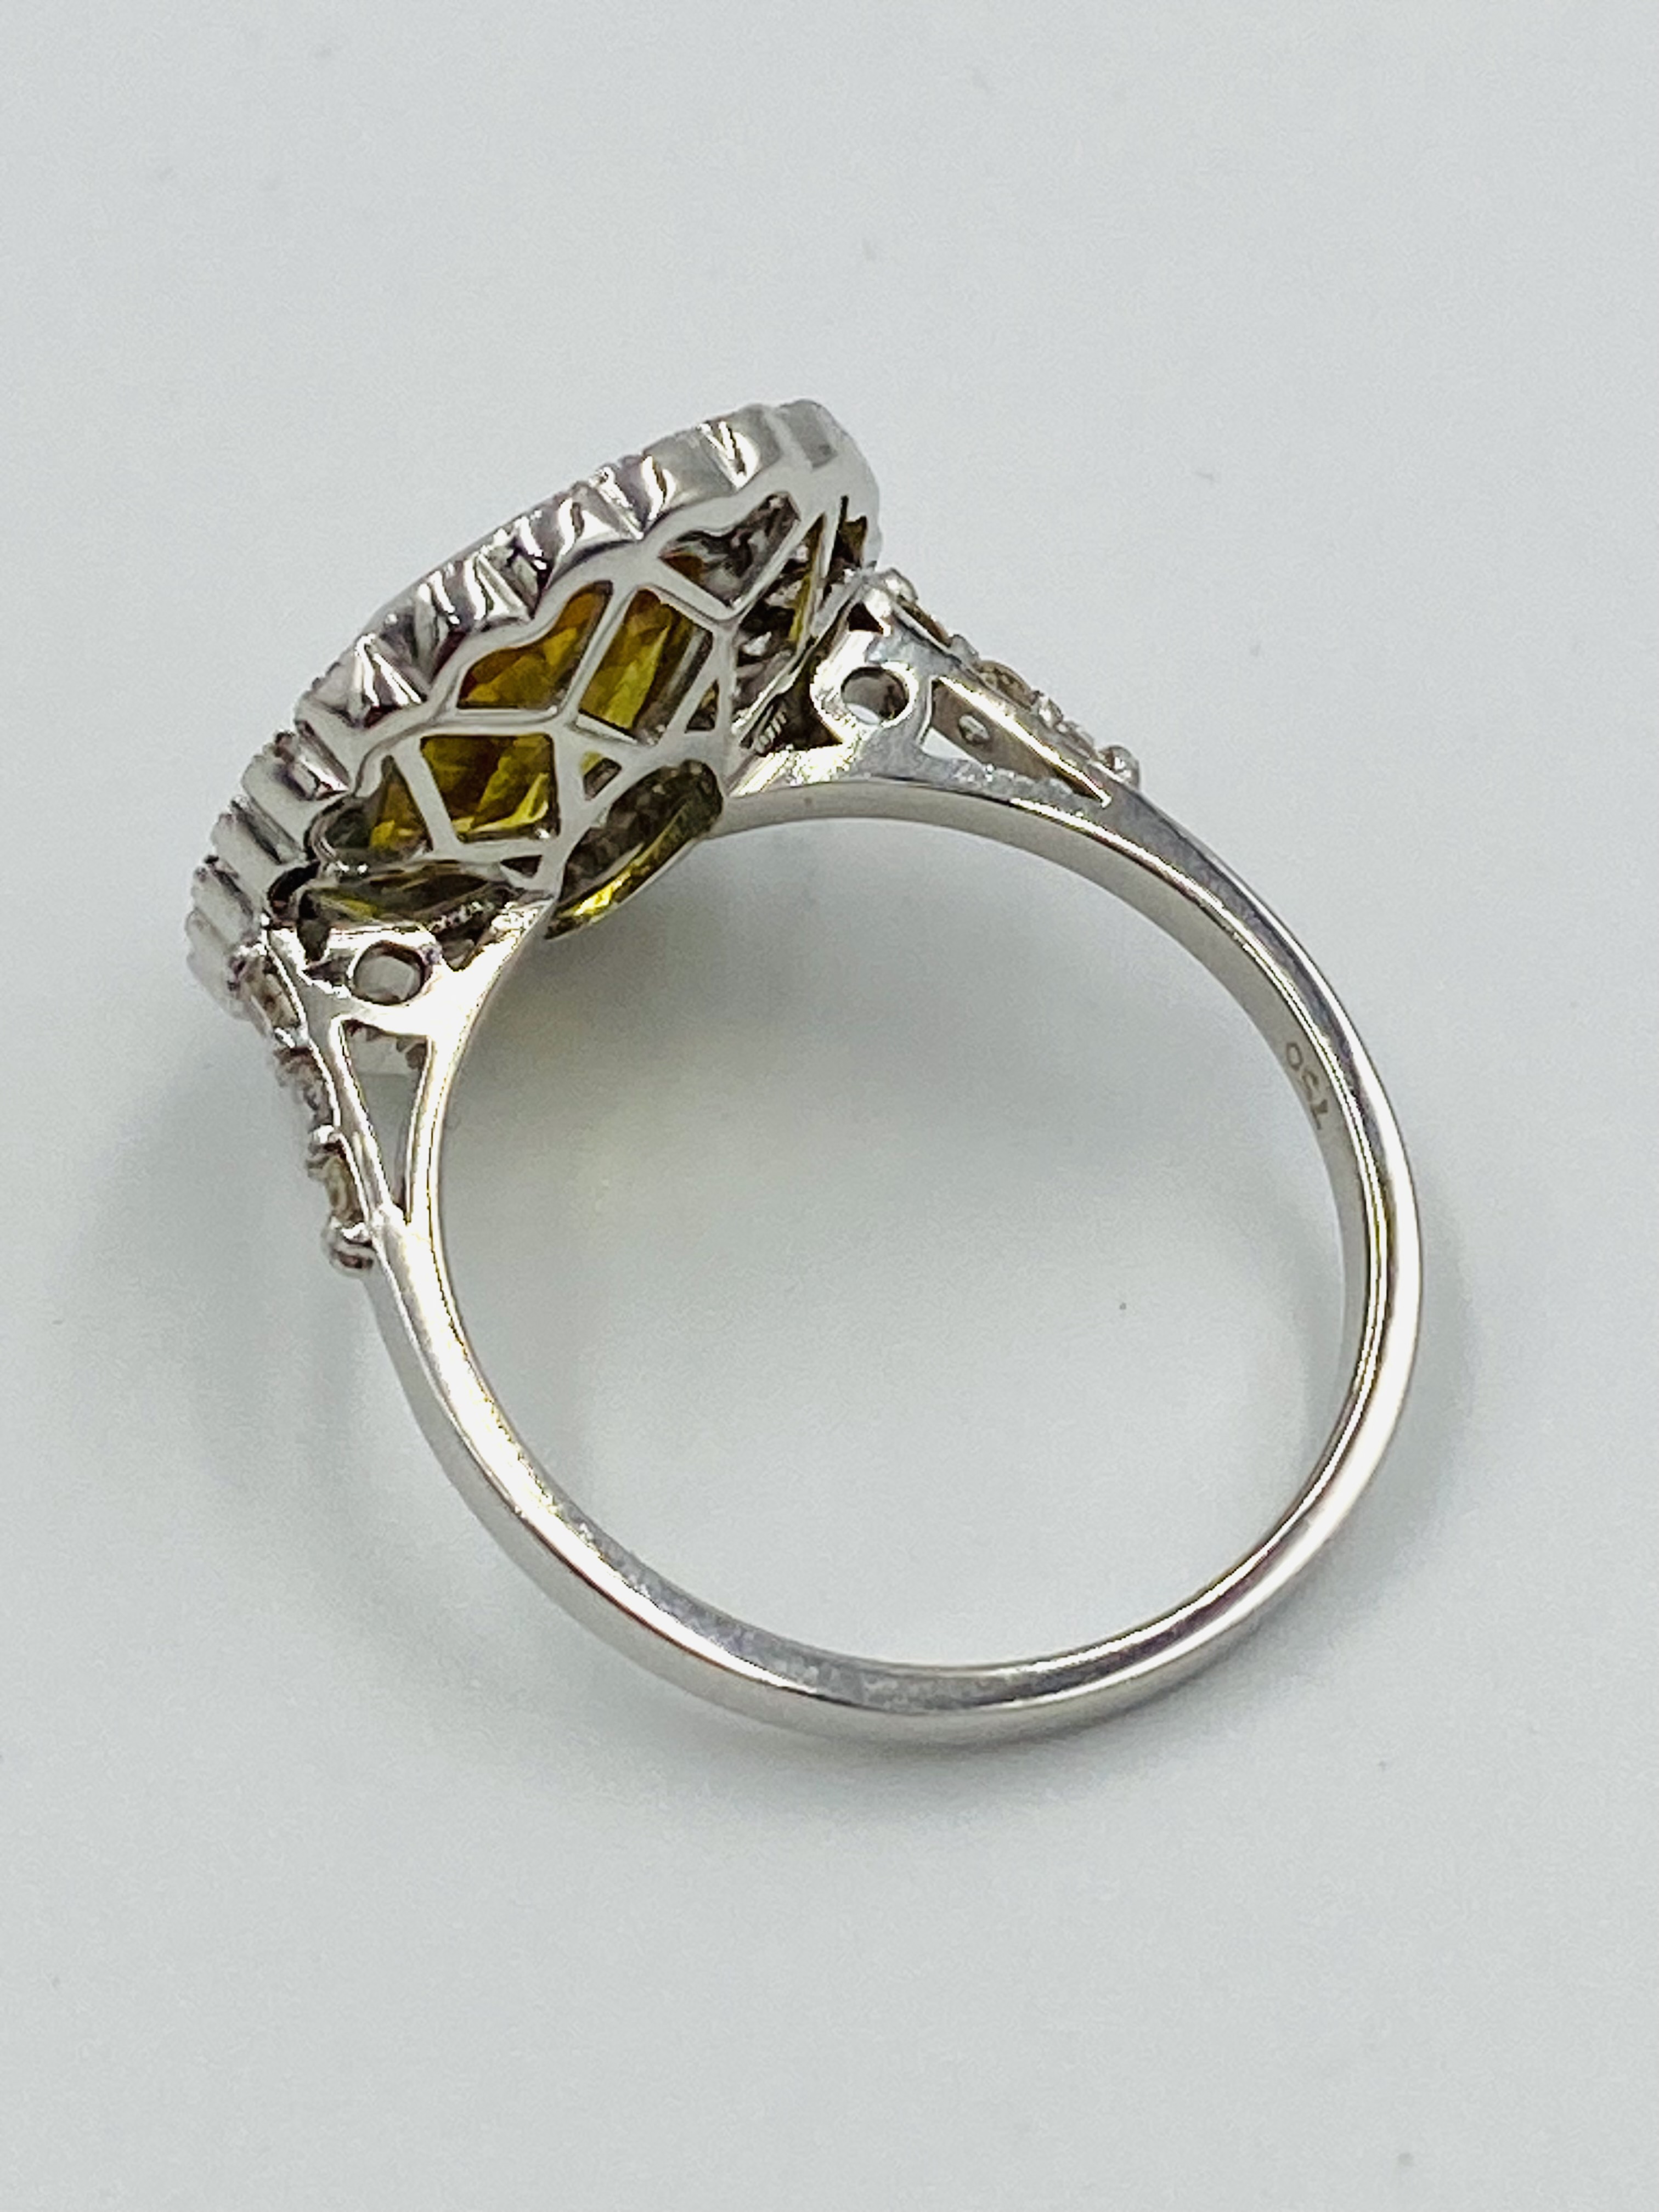 18ct white gold, yellow sapphire and diamond ring - Image 3 of 4